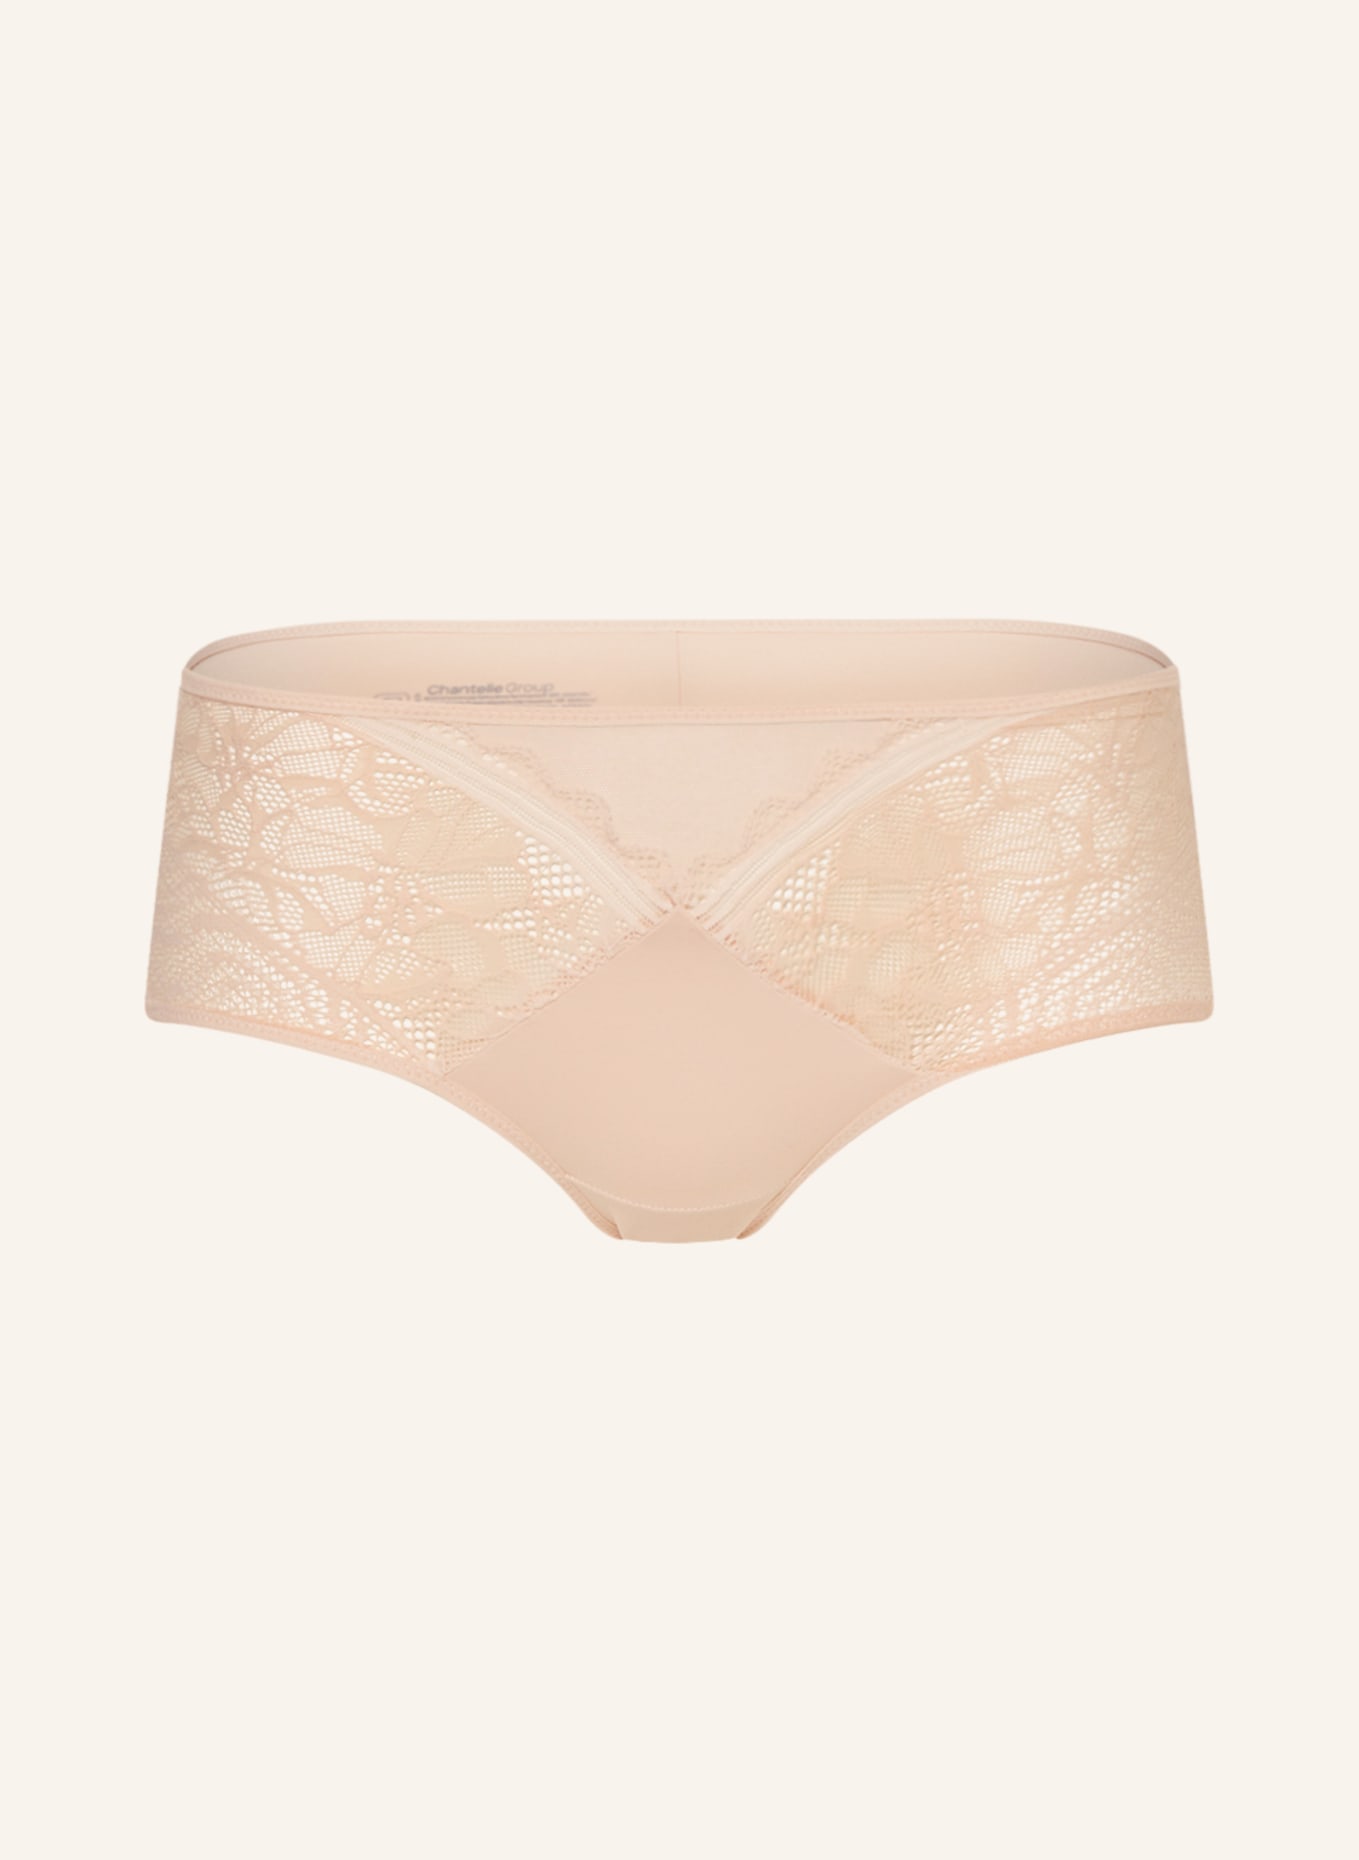 CHANTELLE Thong FLORAL TOUCH in nude